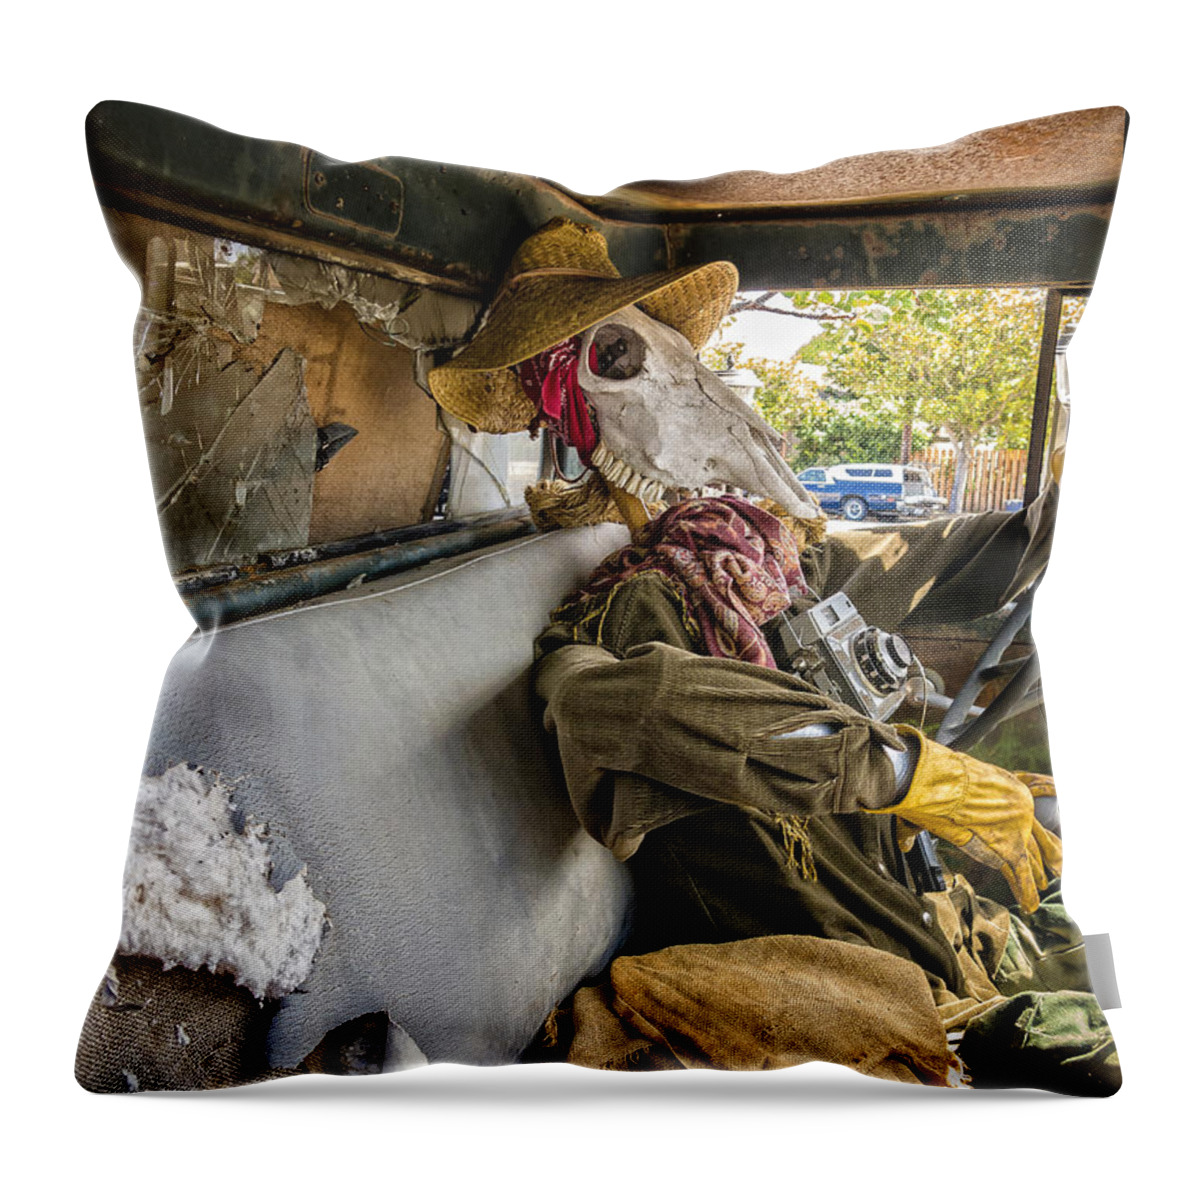 Scarecrow Throw Pillow featuring the photograph Dying For The Shot by Caitlyn Grasso